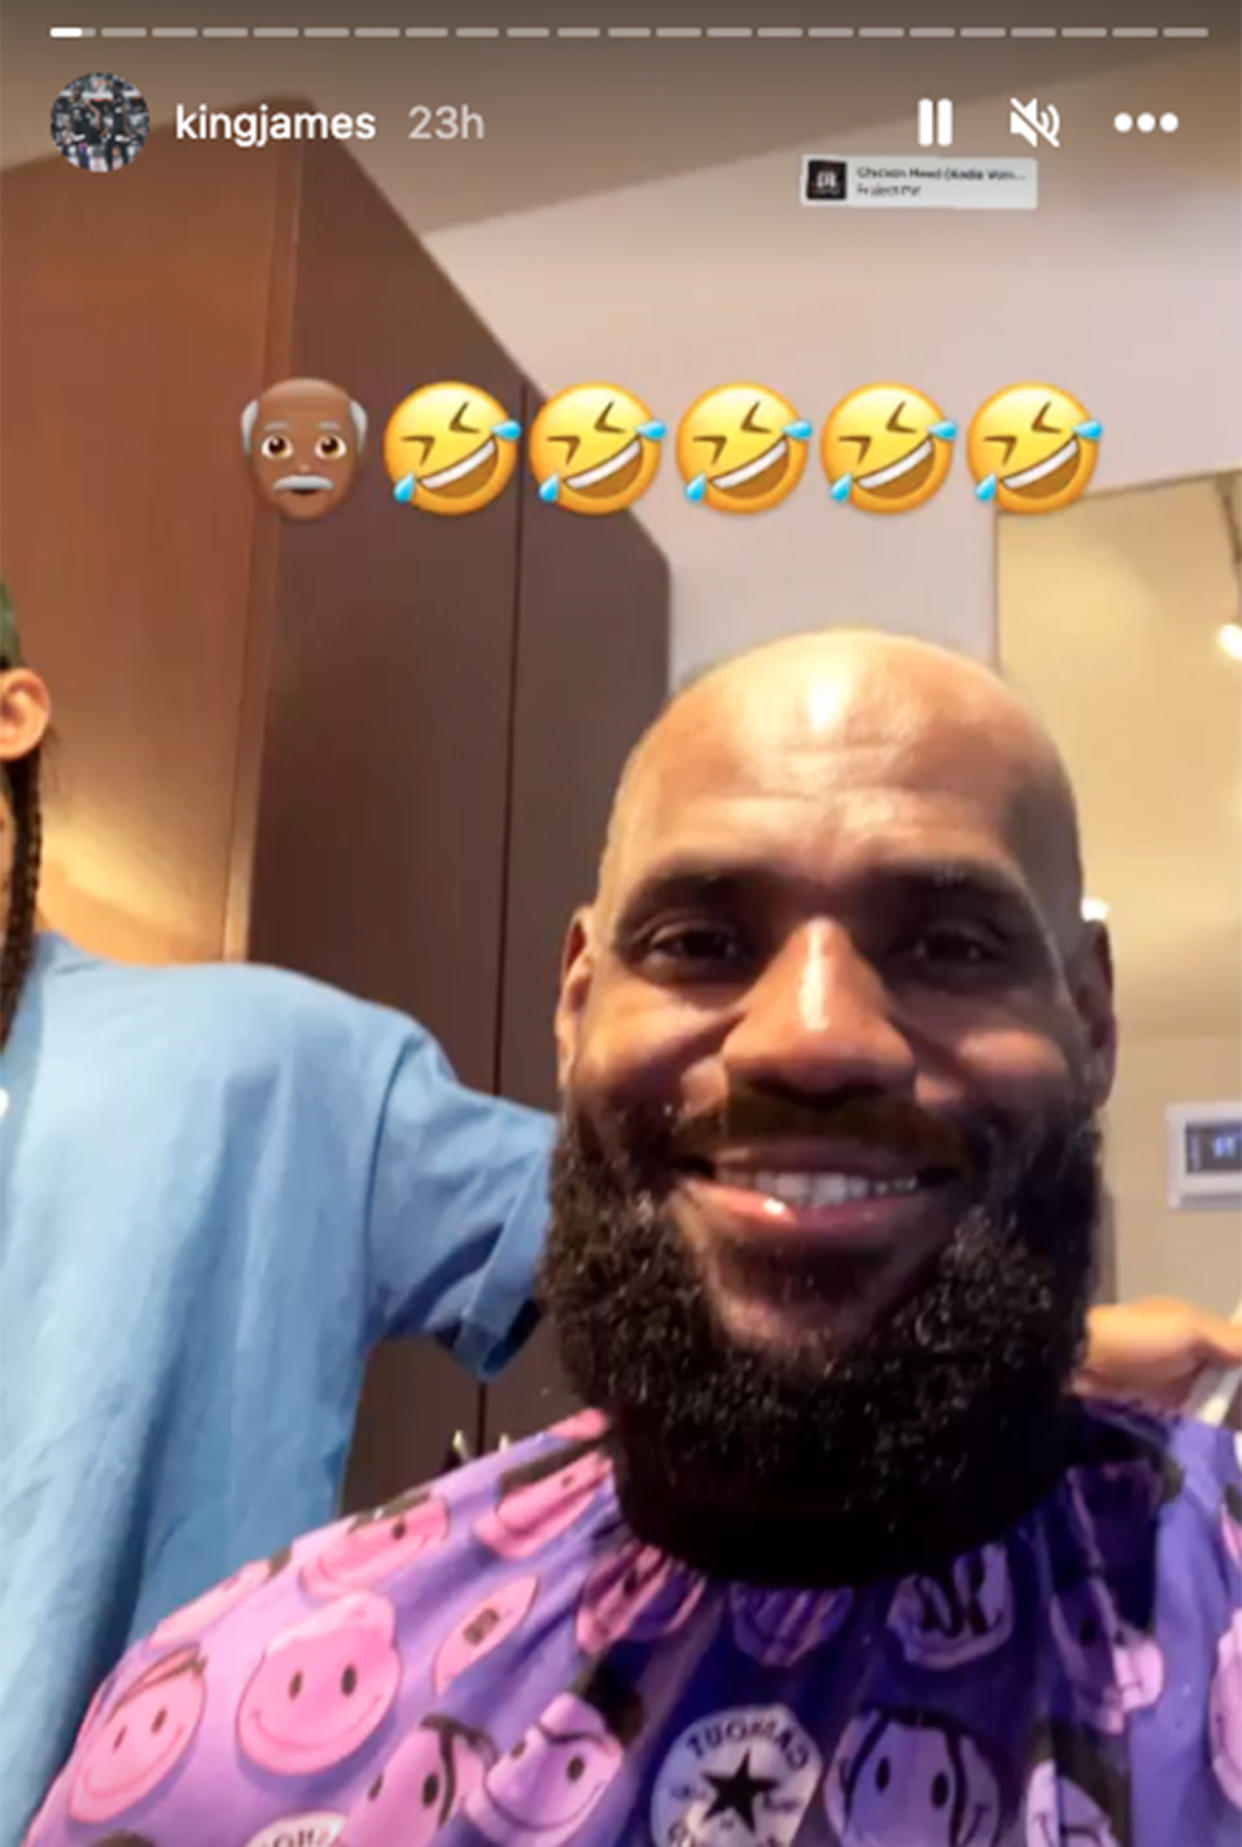 LeBron James showed off his bald head. Whether it's real is another matter. (kingjames via Instagram)